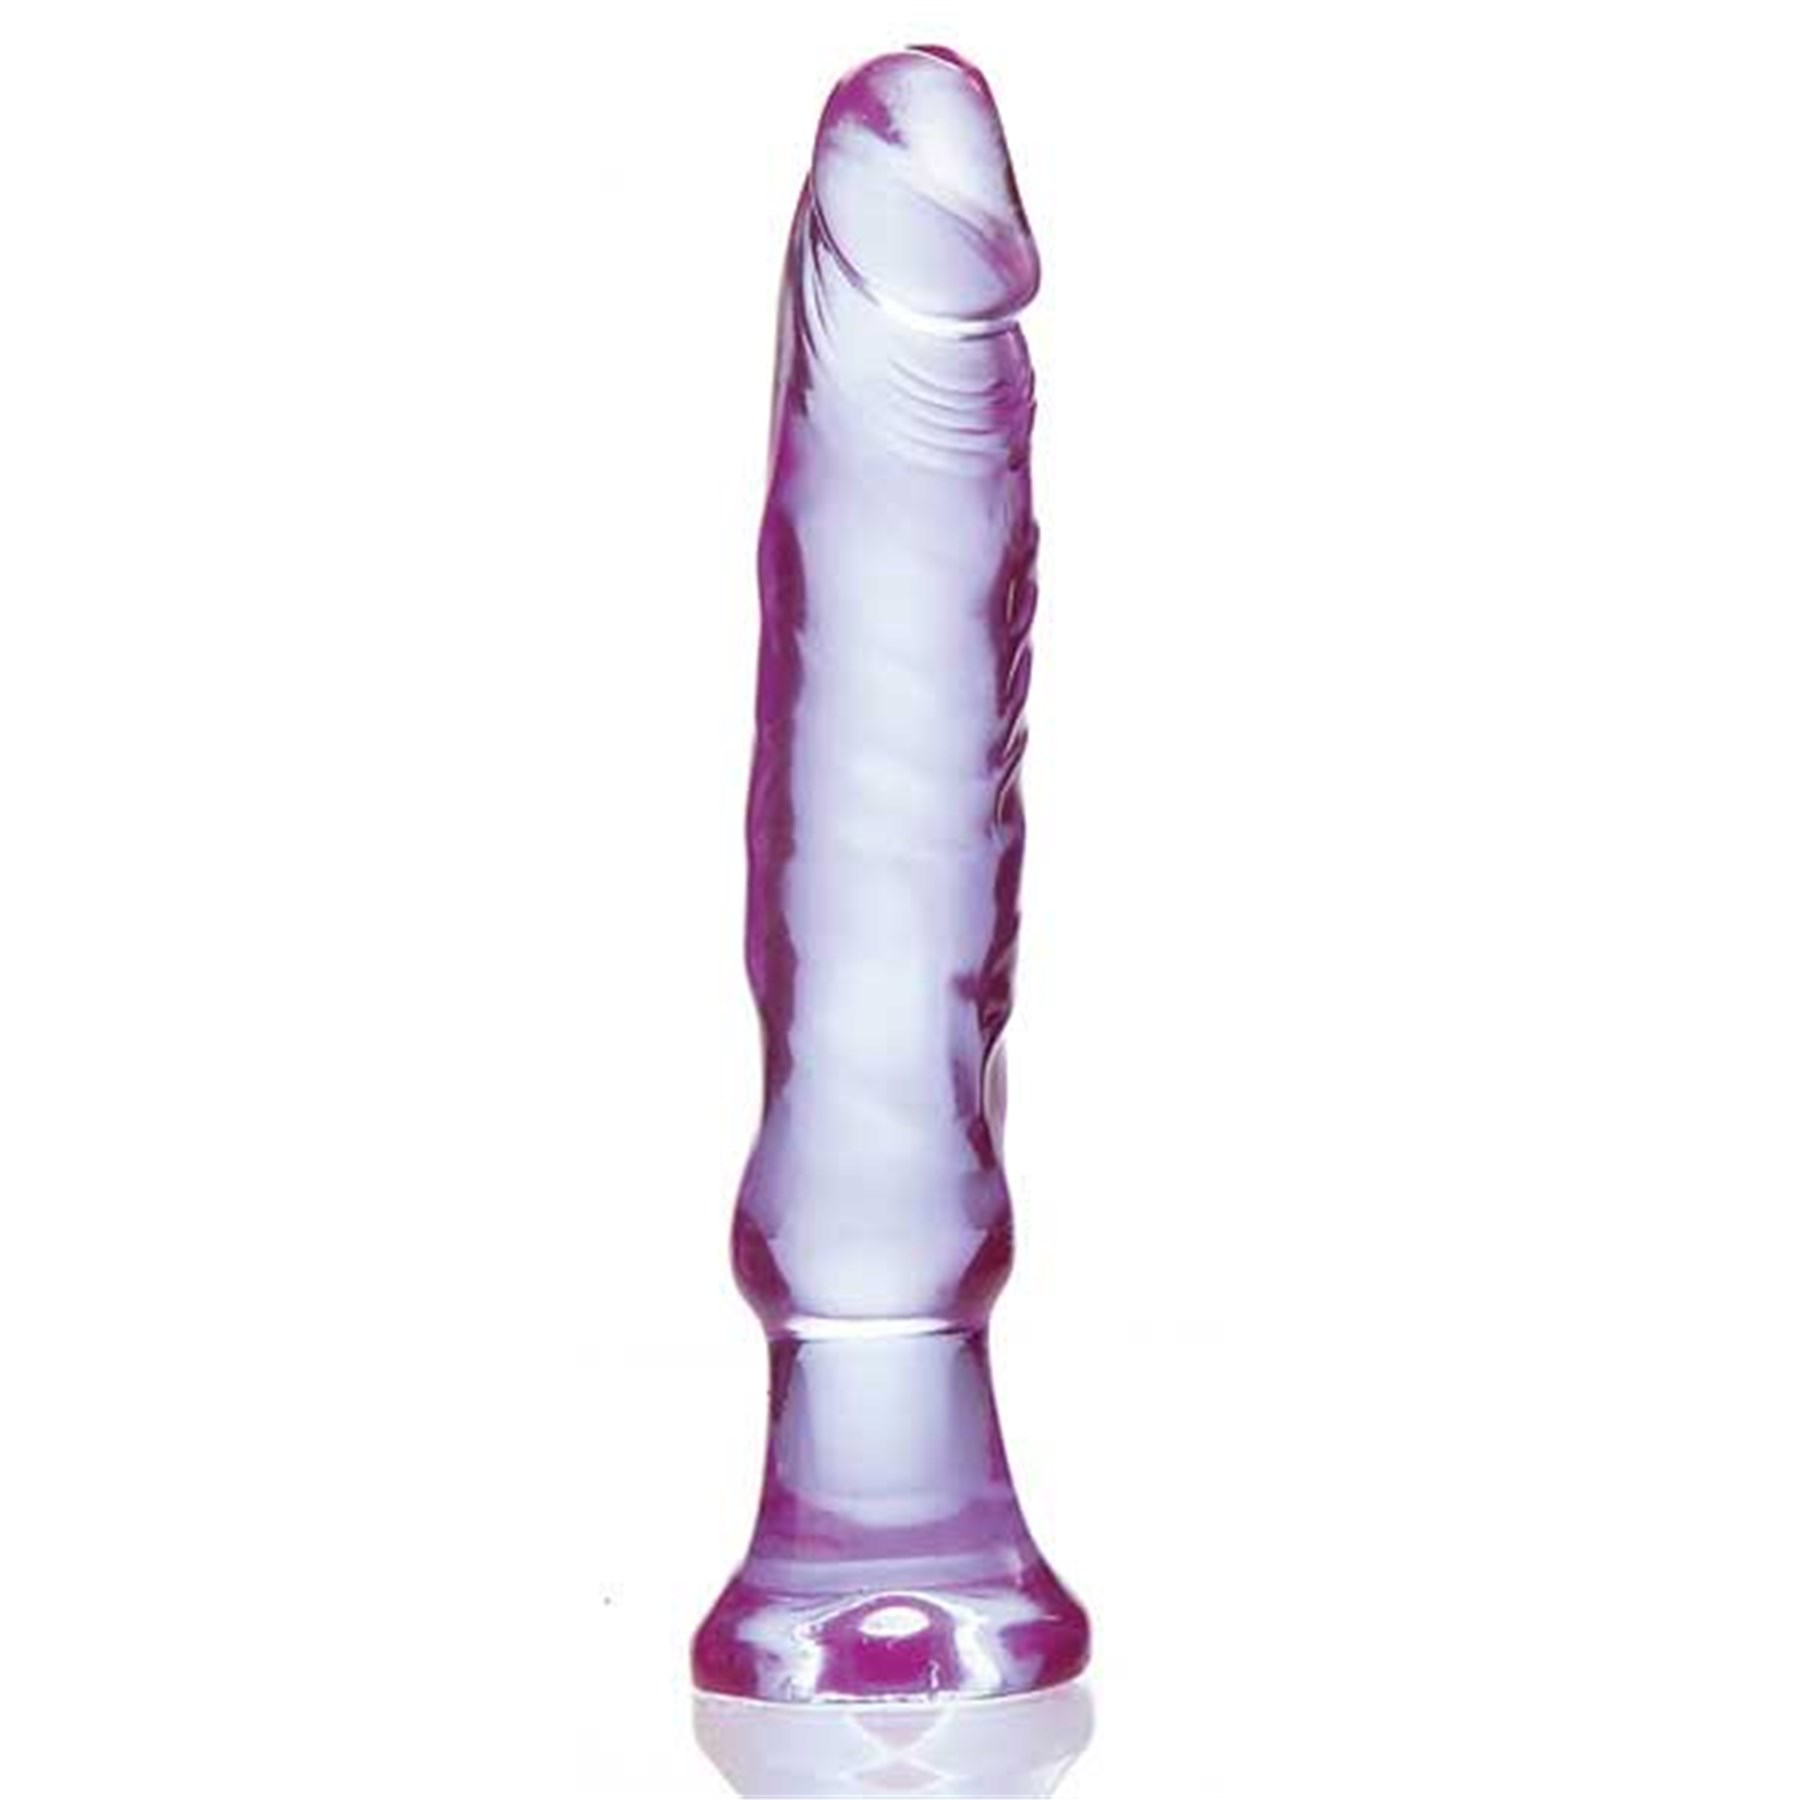 Anal Dildos Male Vibrator in Lima